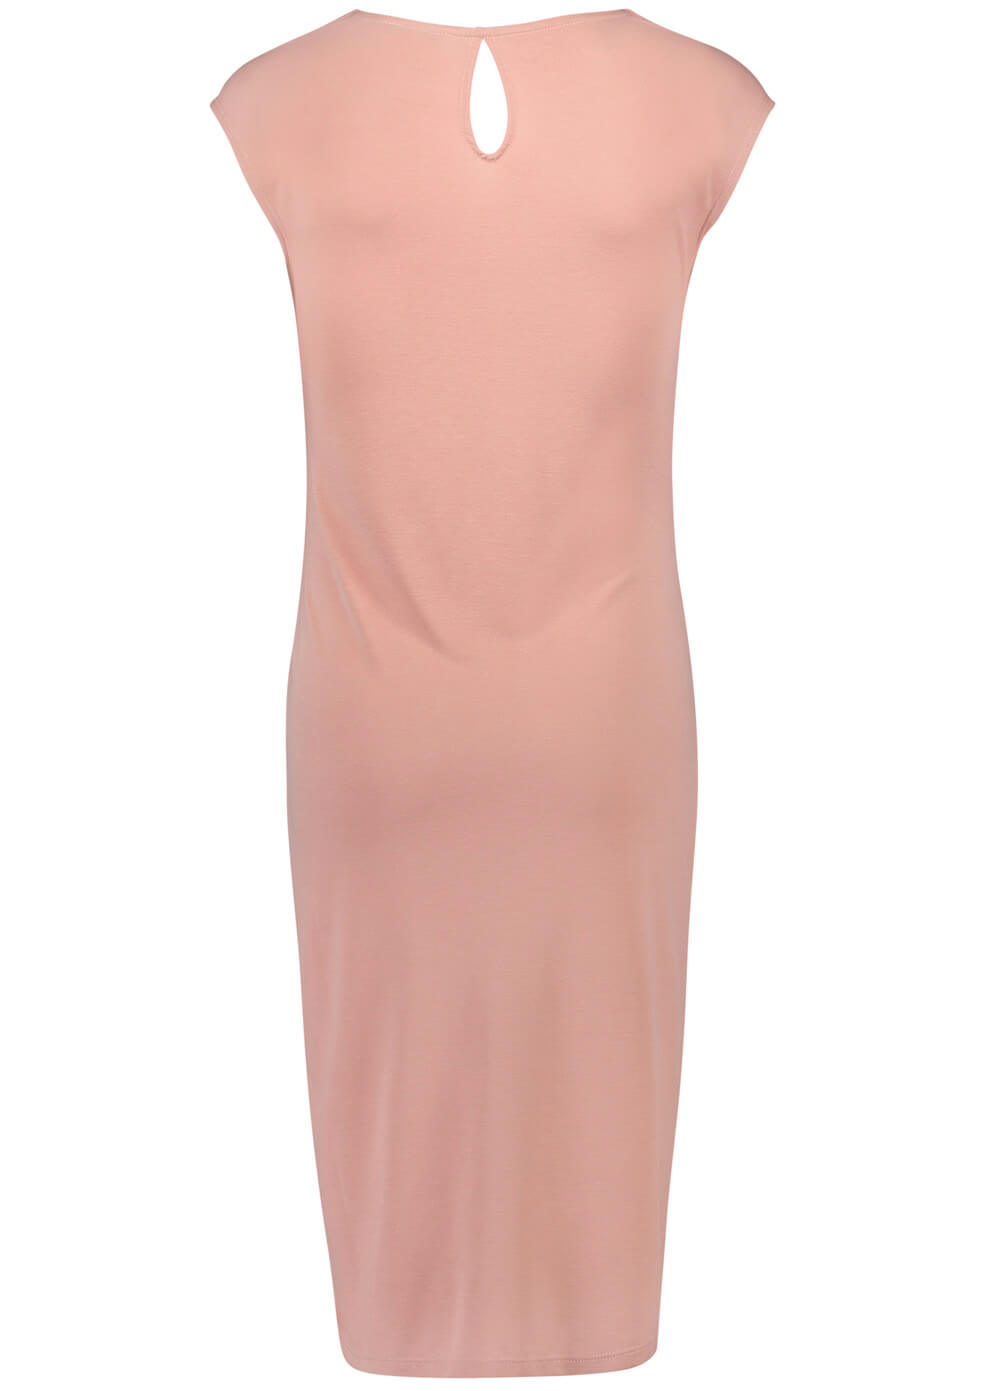 Annefleur Maternity Dress in Blush by Noppies